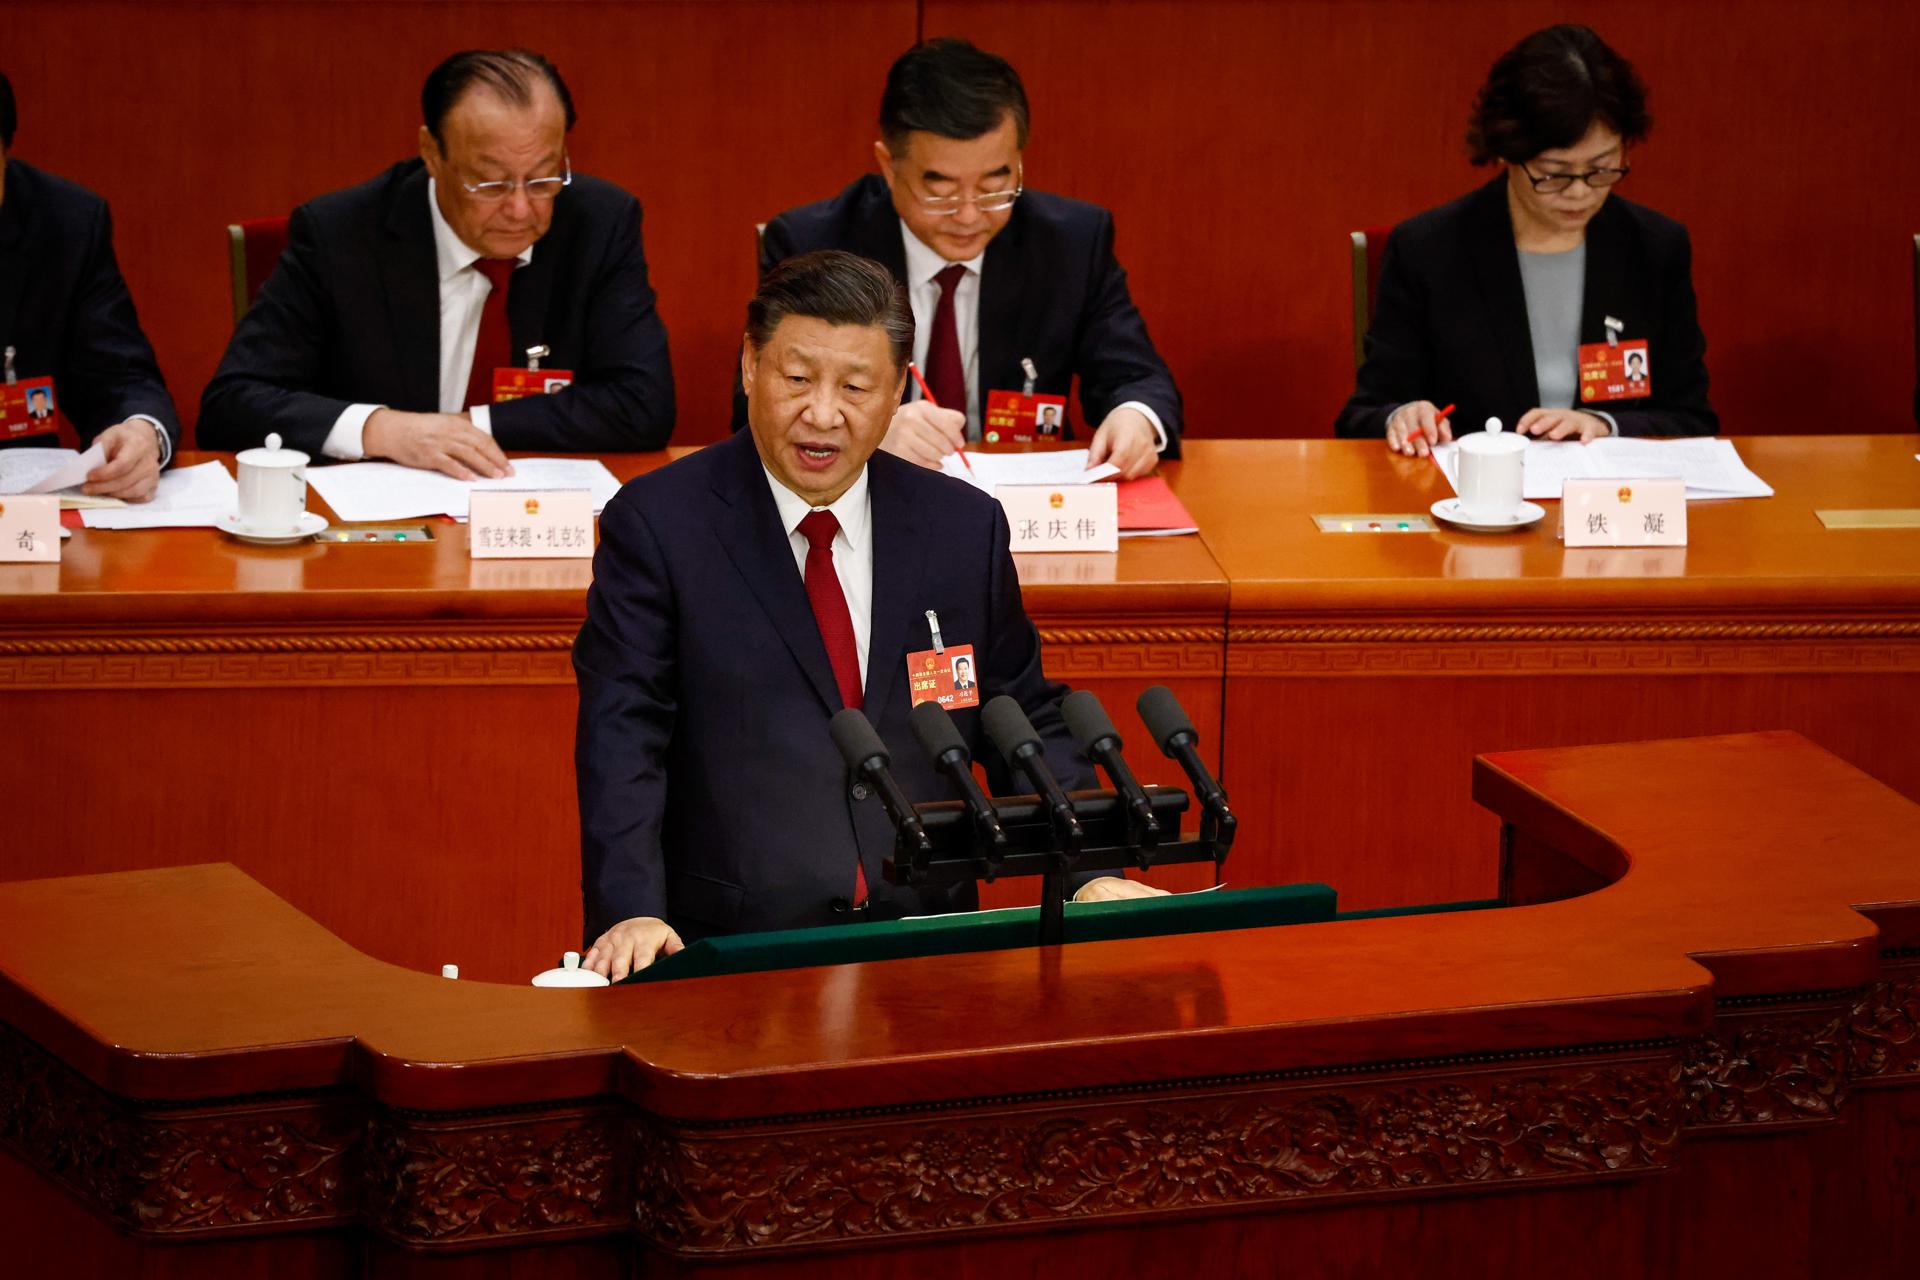 Chinese President Xi Jinping speaks during the Closing Session of the National People's Congress (NPC) at the Great Hall of the People, in Beijing, China, 13 March 2023. EFE-EPA/MARK R. CRISTINO